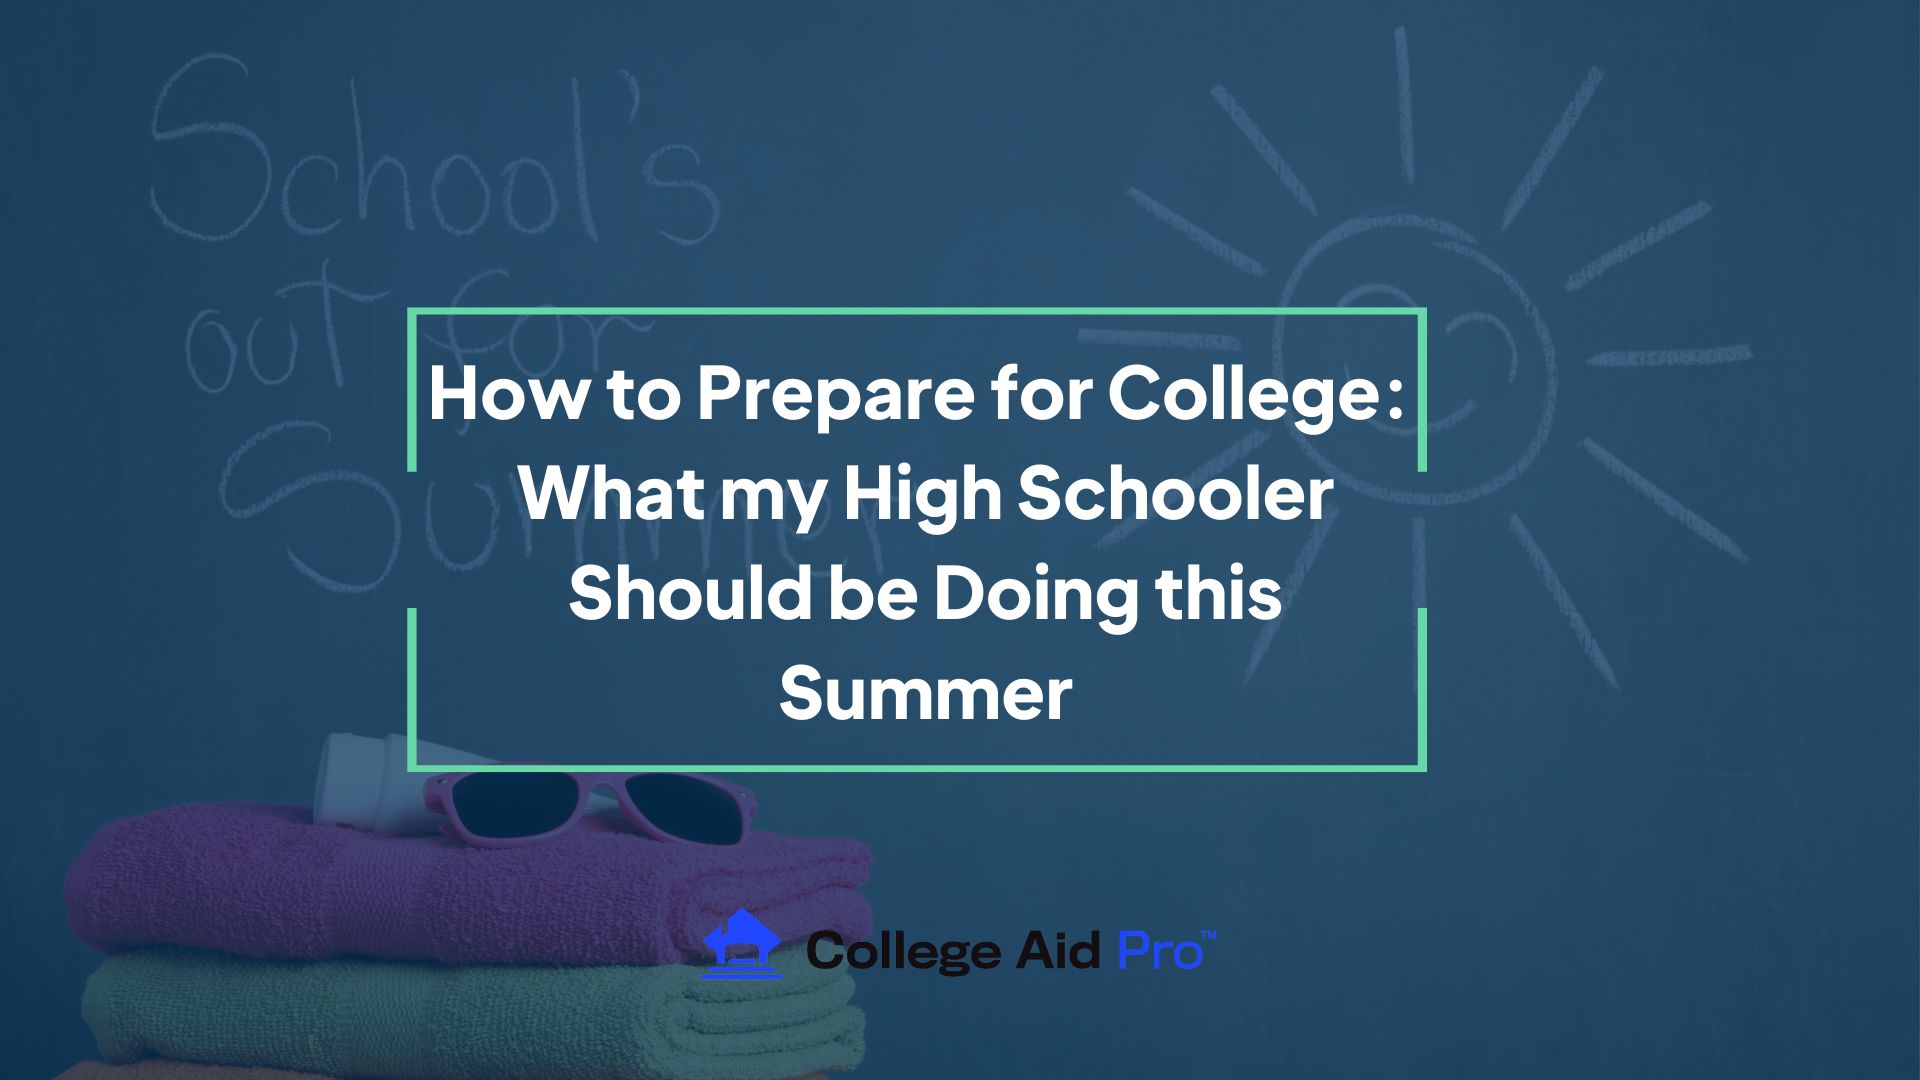 School's out for summer, how to prepare for college